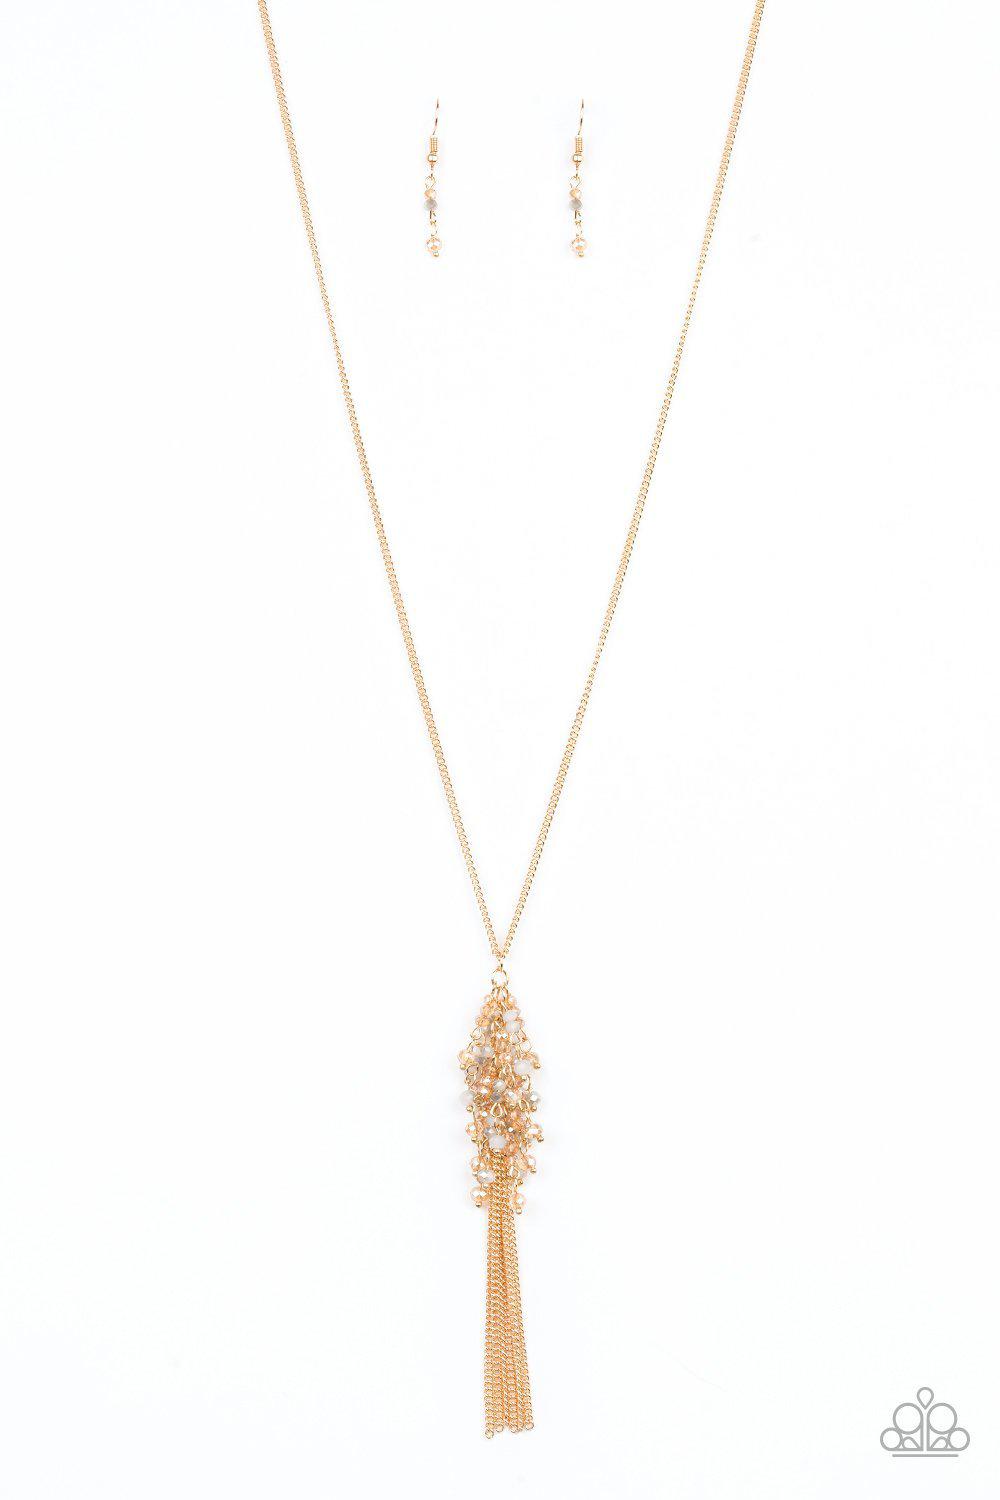 Twilight Twinkle Gold Tassel Necklace - Paparazzi Accessories-CarasShop.com - $5 Jewelry by Cara Jewels